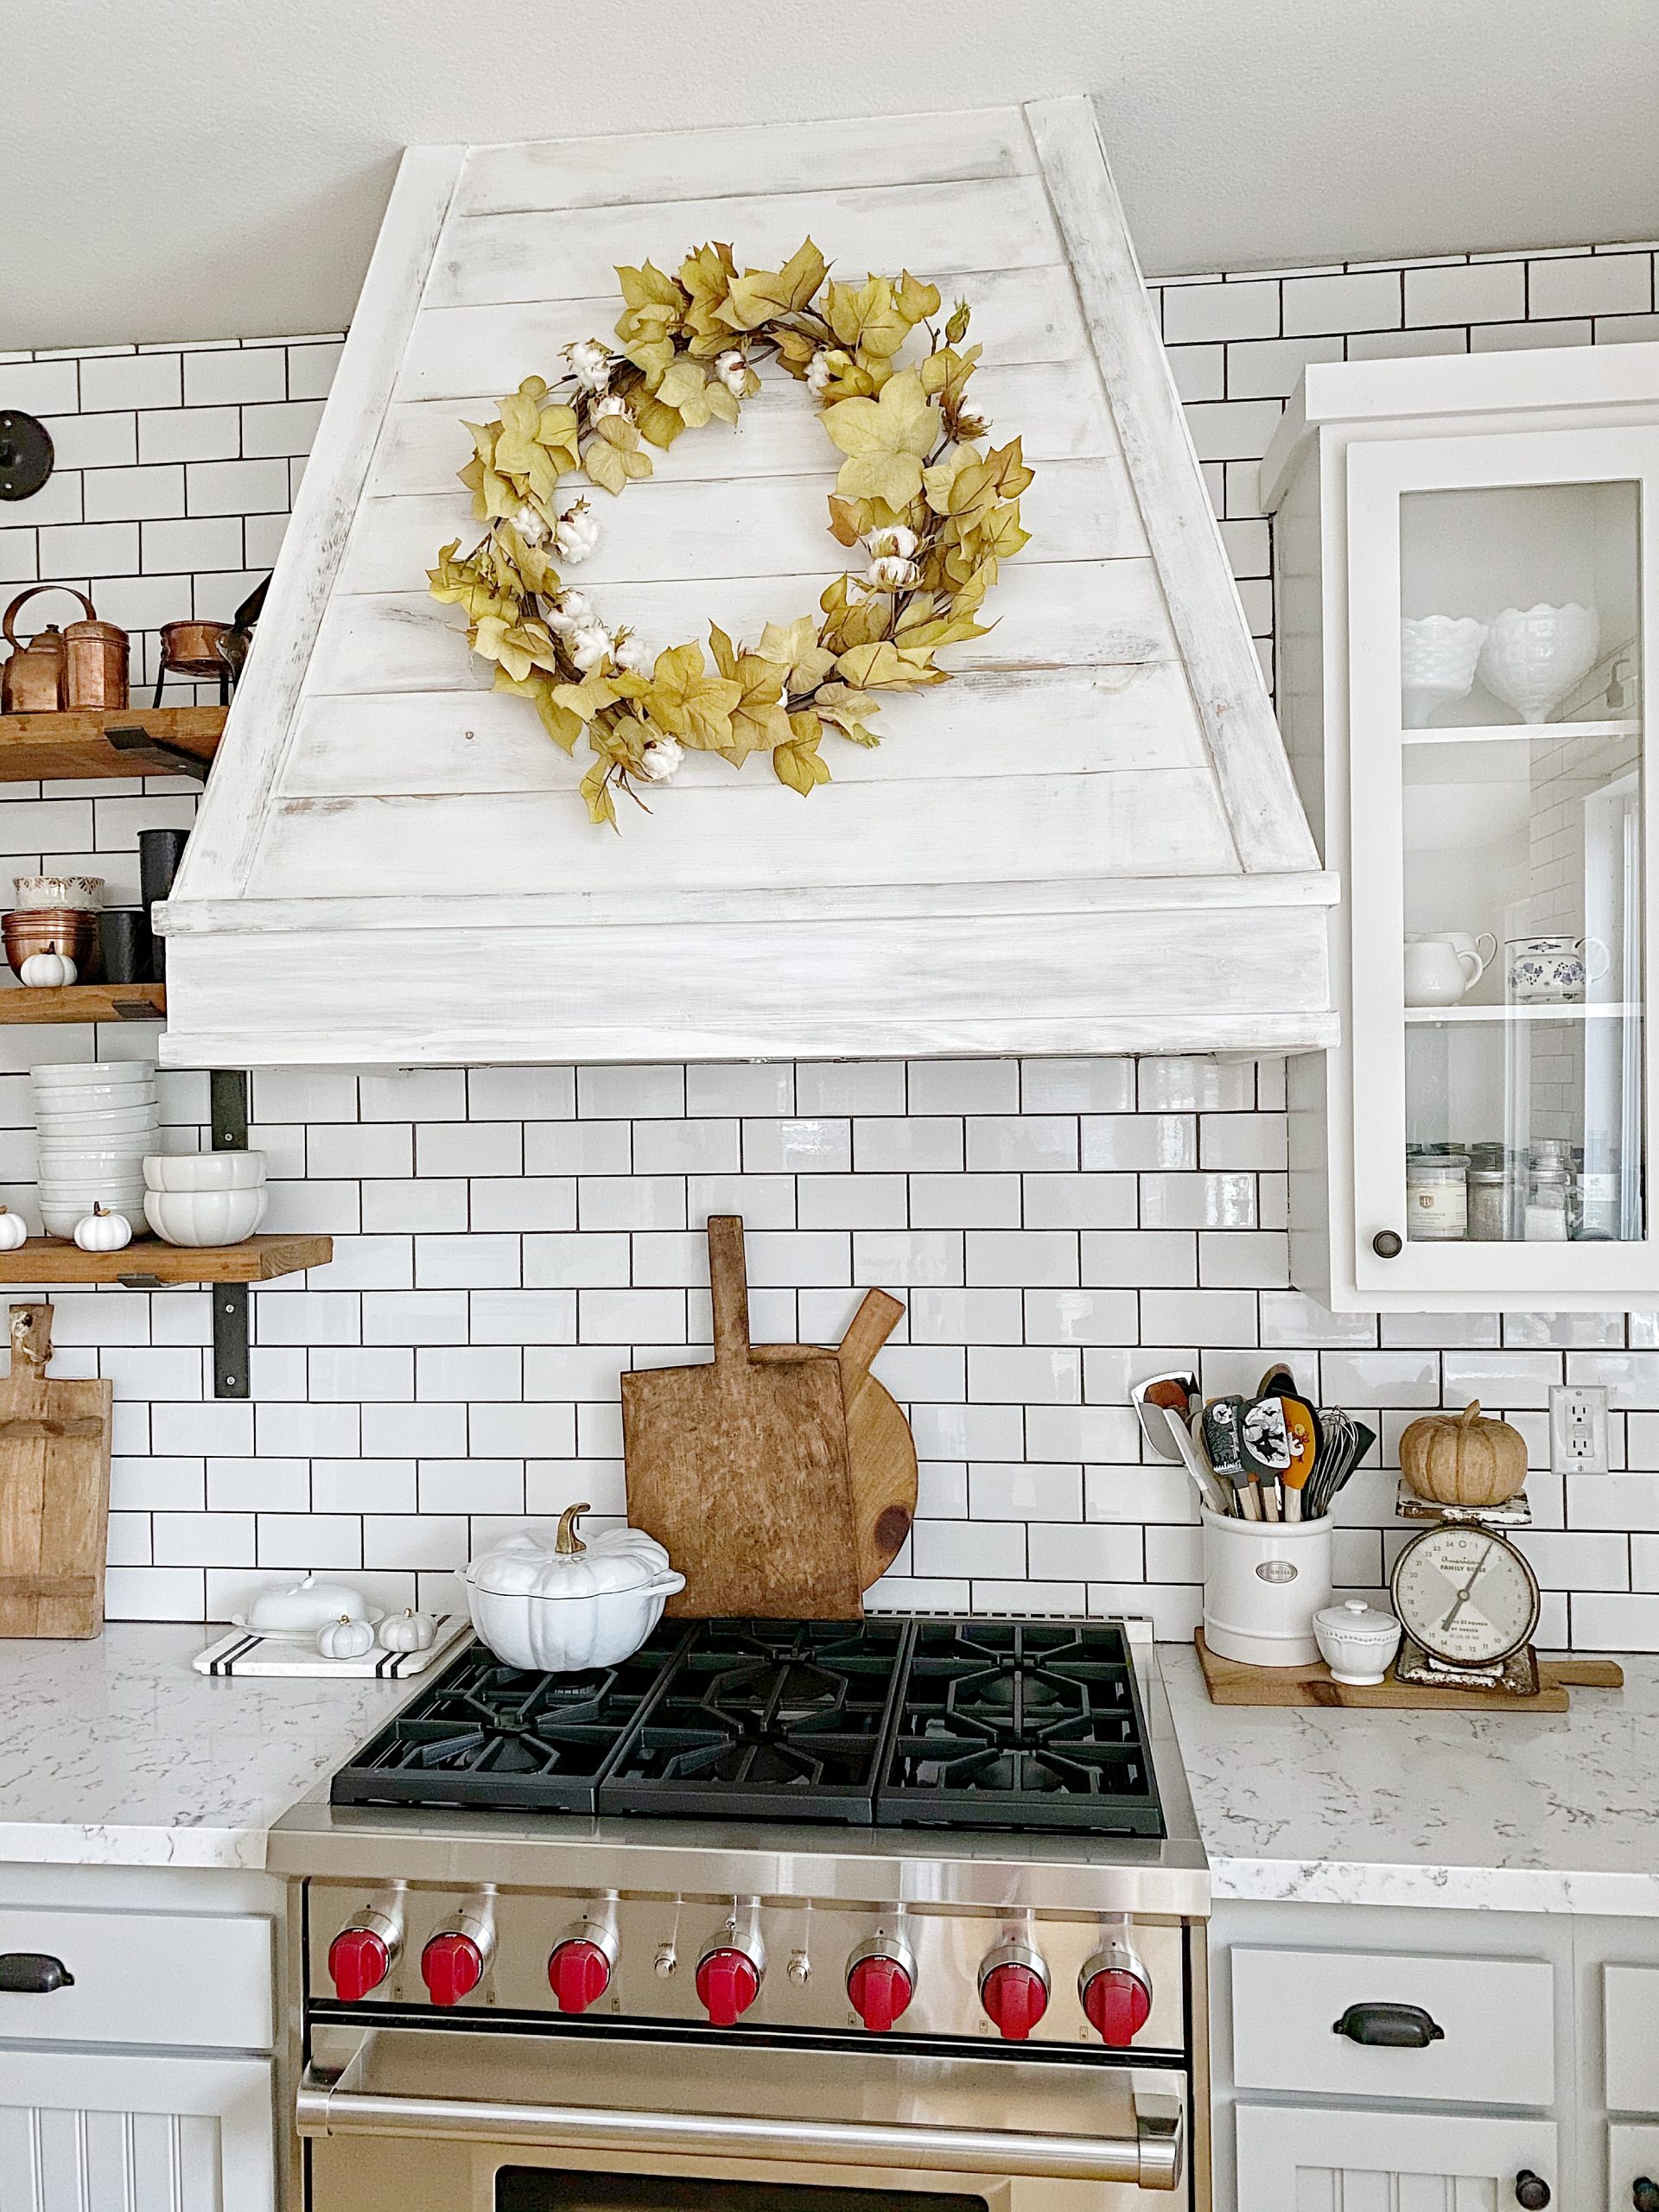 How to Dress Up Your Kitchen For Fall